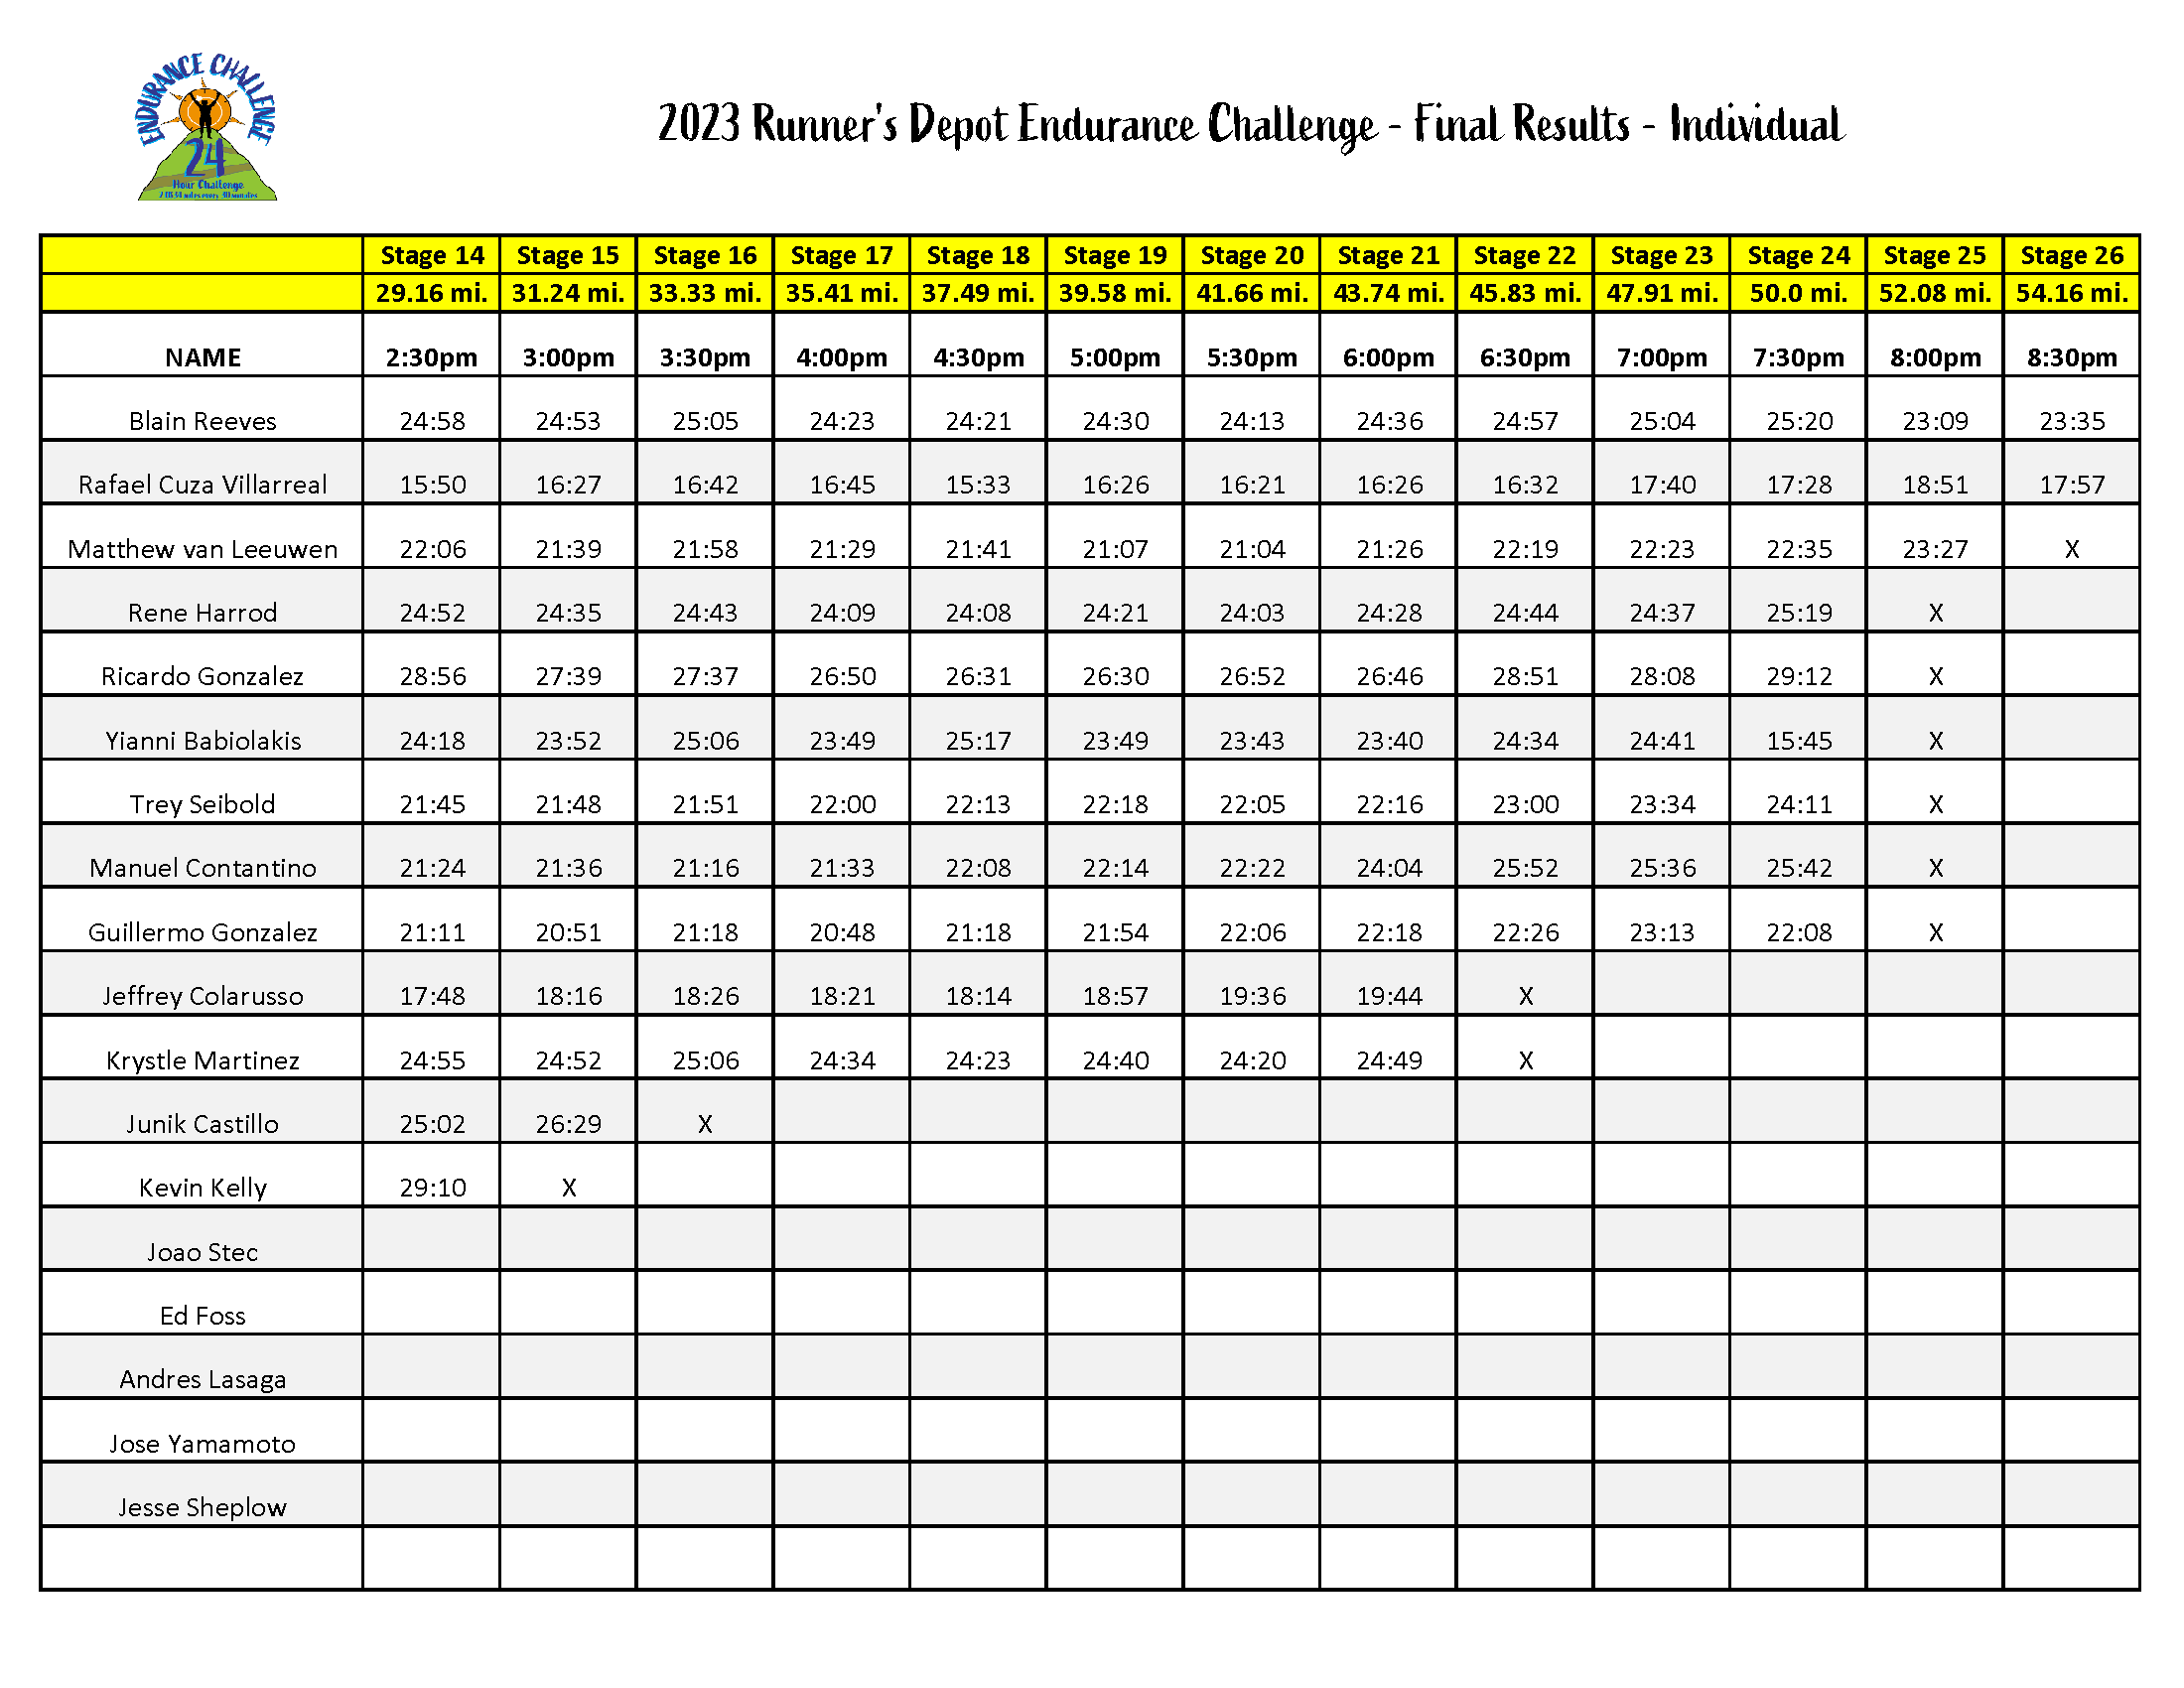 2023 Endurance Challenge_Individual Results_230pm to 830pm_Page_1